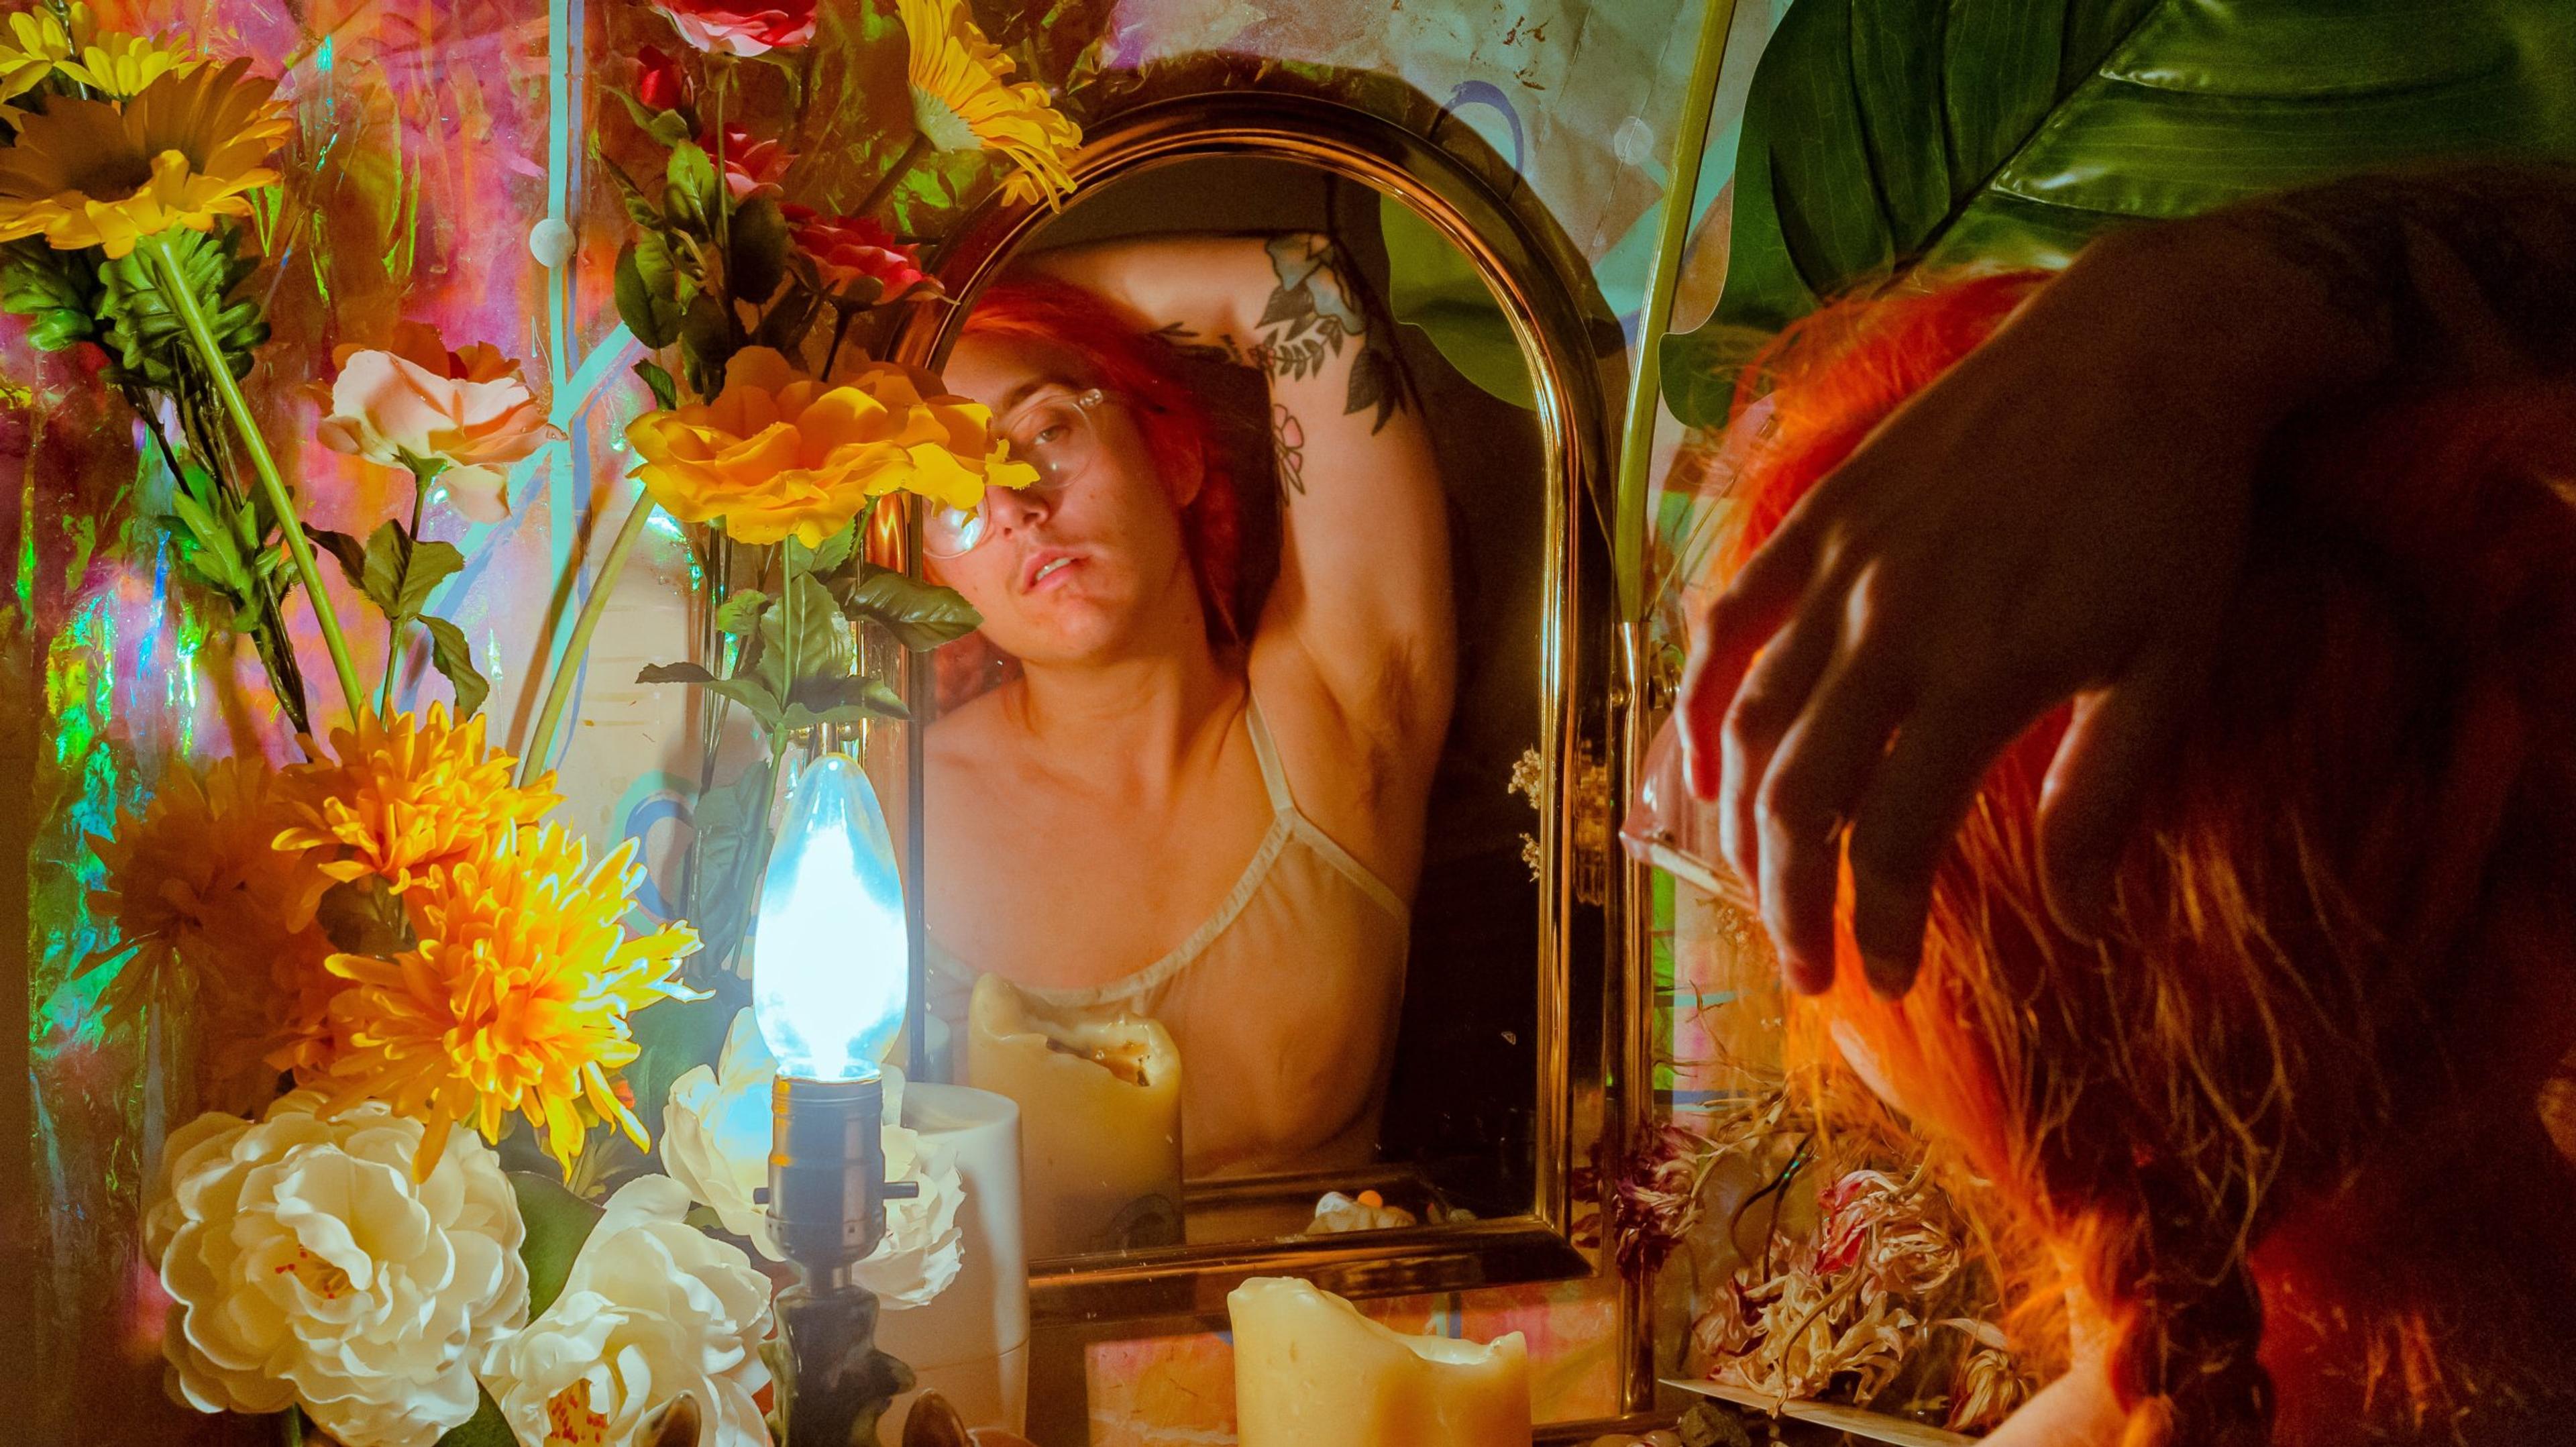 A photograph of a red-headed person looking in a mirror while holding their arm above their head, surrounded by vibrant foliage